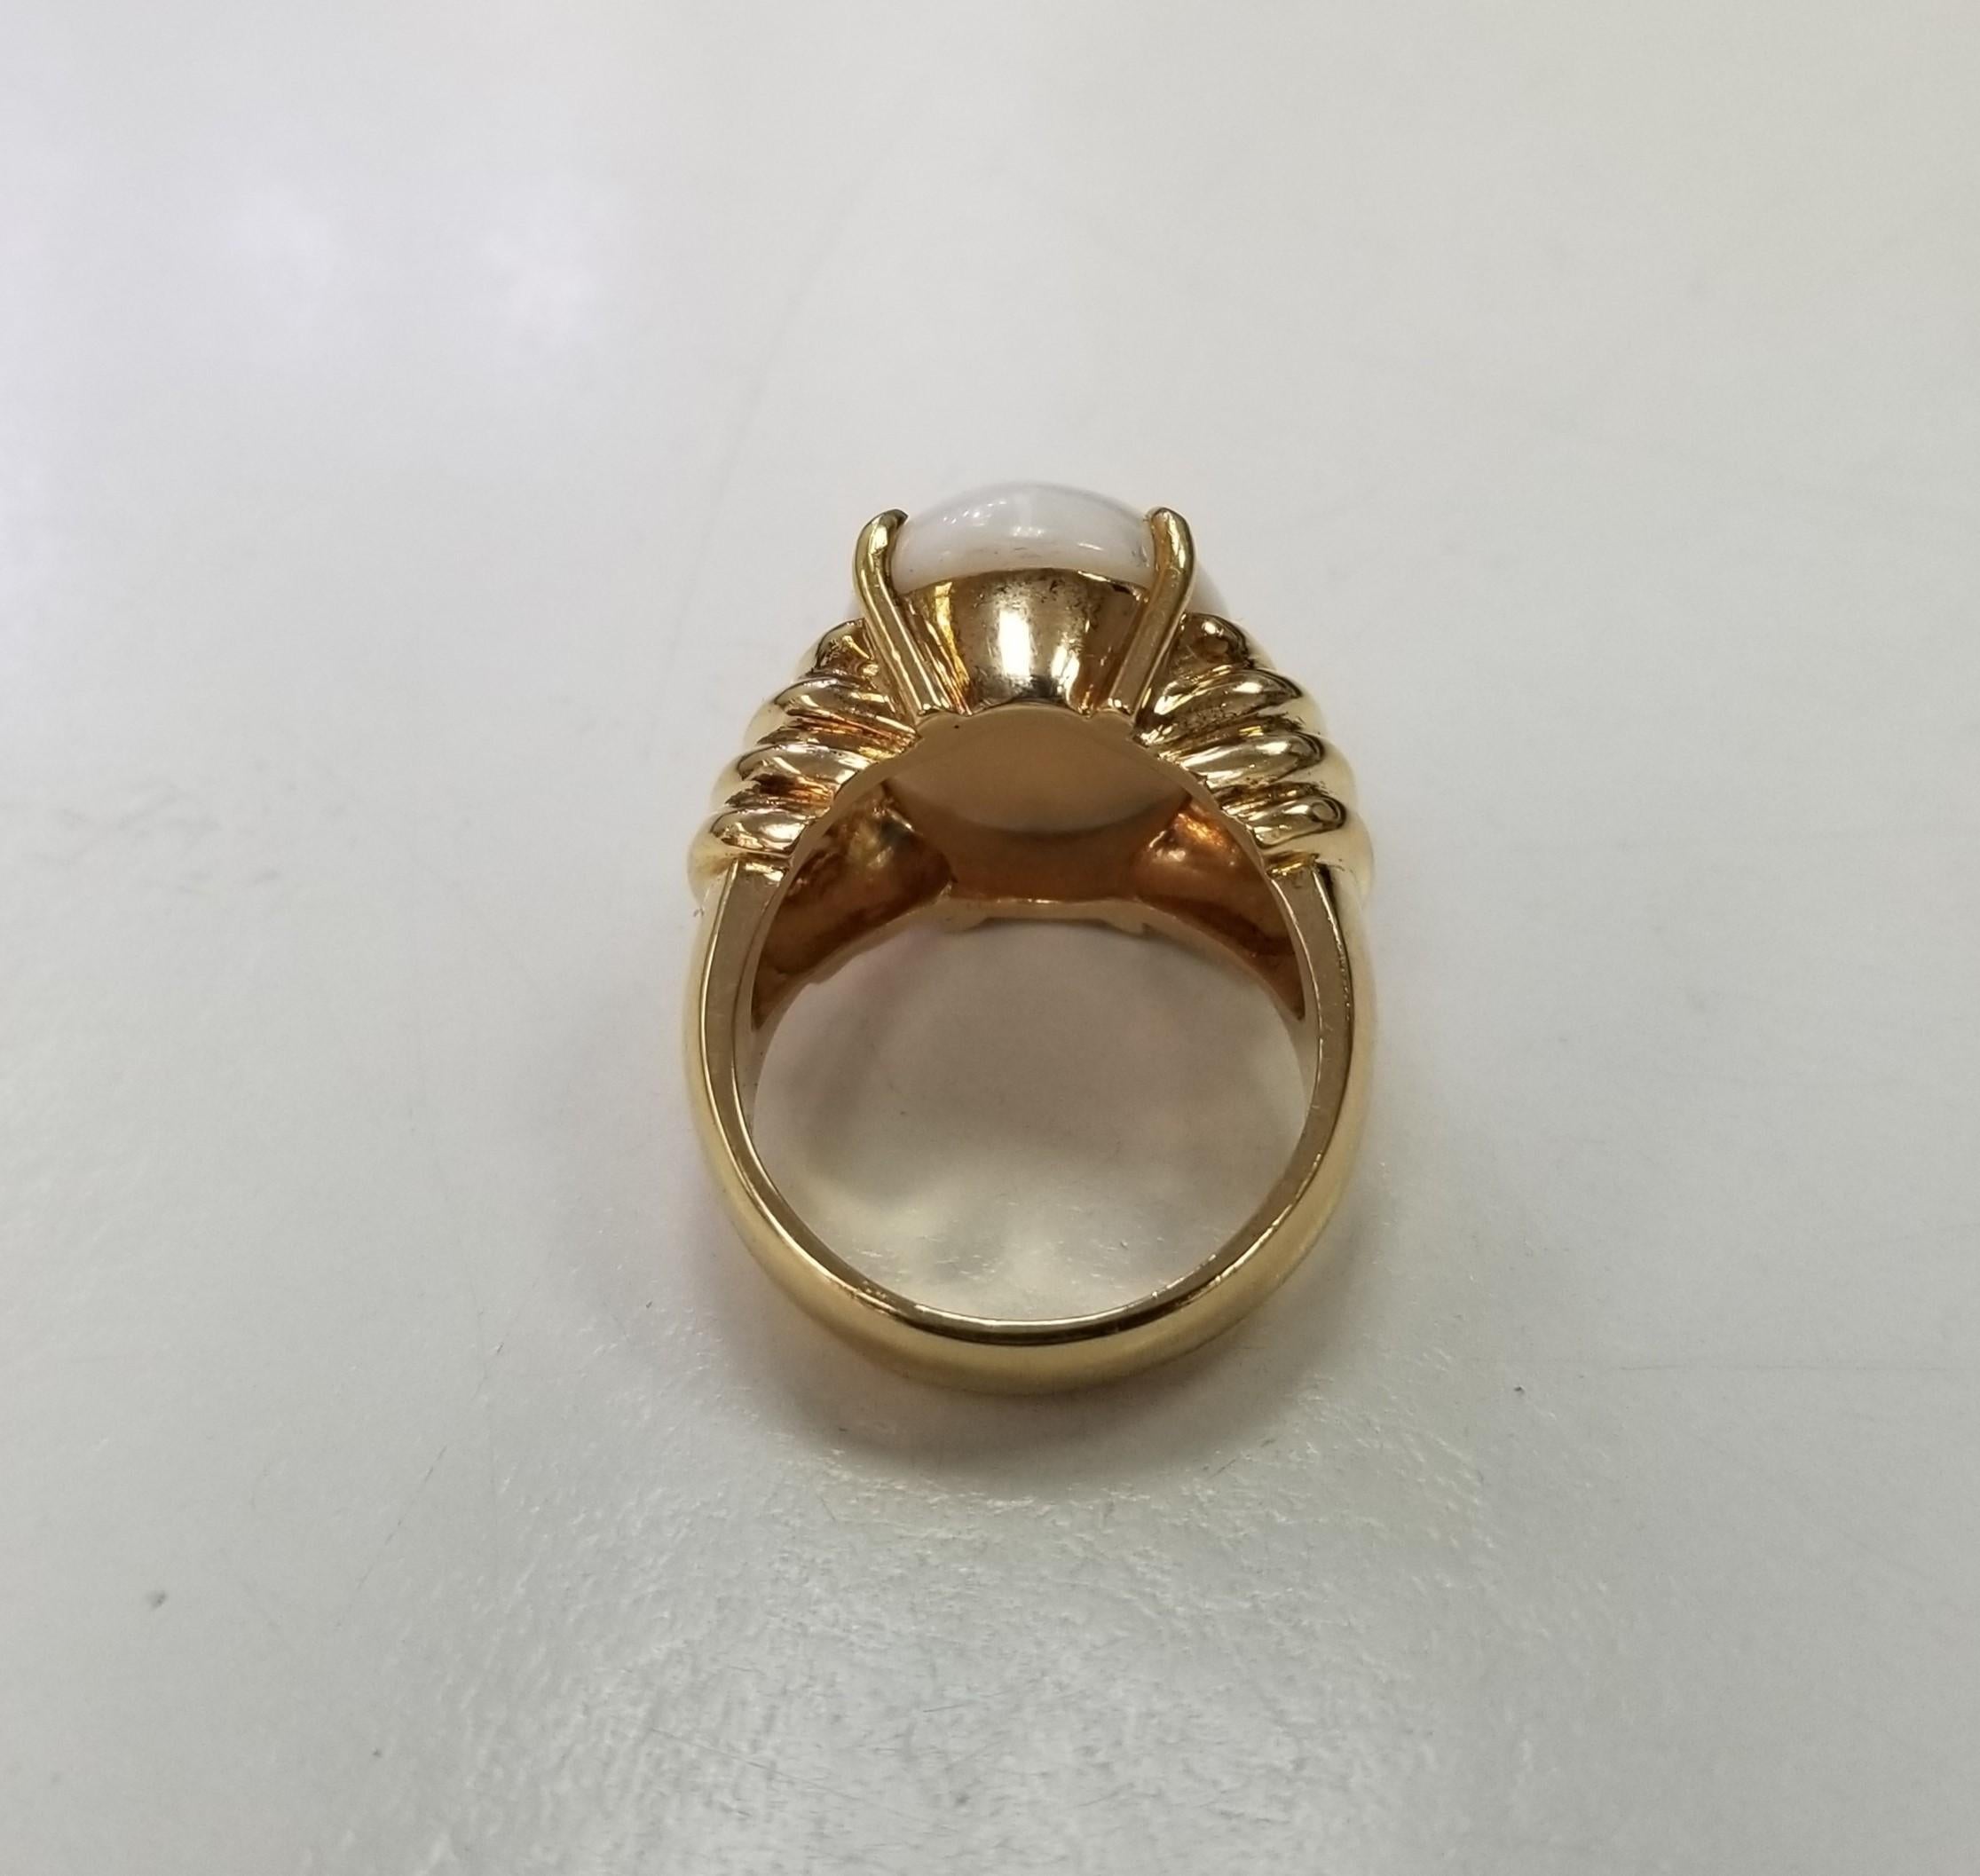 *Motivated to Sell – Please make a Fair Offer*
Gump's 18 Karat Yellow Gold Ring Featuring An 18mm x 13mm Oval Cabochon White Coral. Finger Size 6; One Sizing Service Included With Purchase. Finished Weight Is 13.1 Grams.
metal: 18k yellow